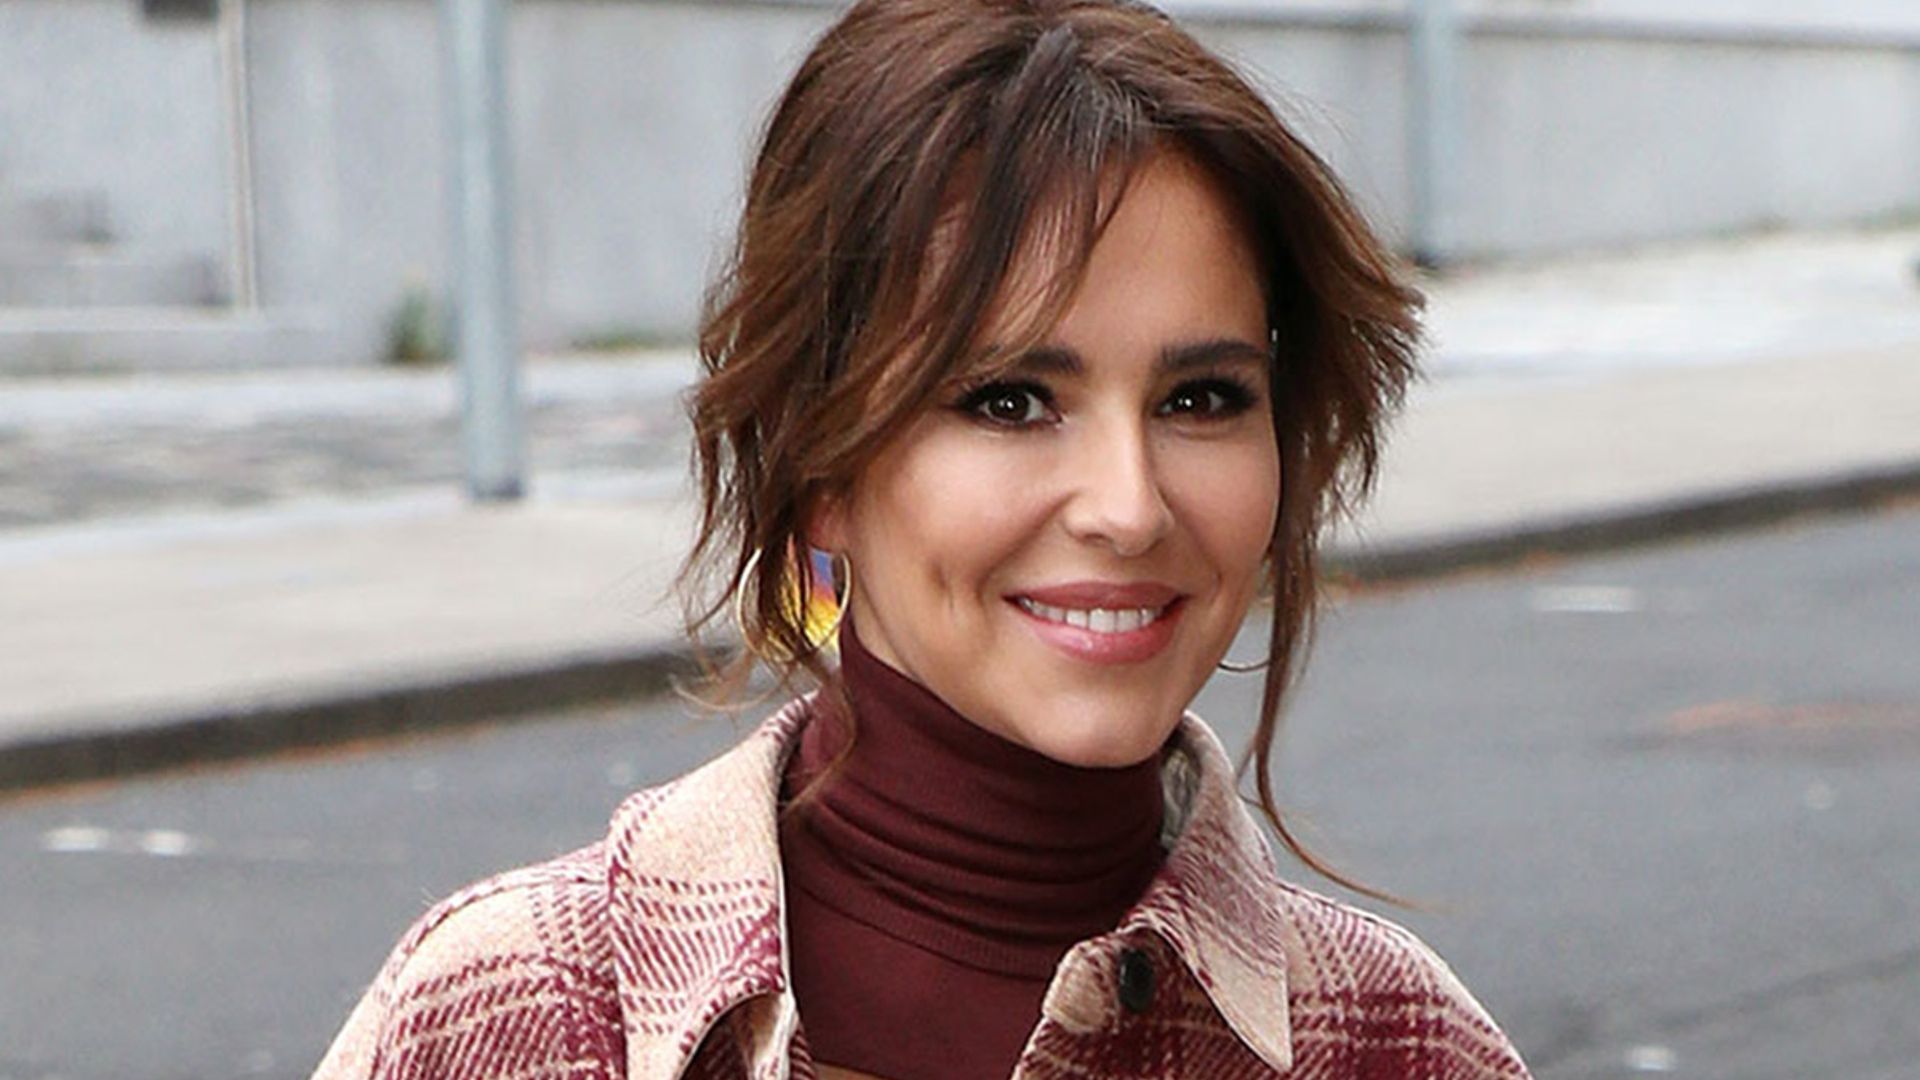 Cheryl wows in show-stopping crimson outfit for meeting with Prince Charles